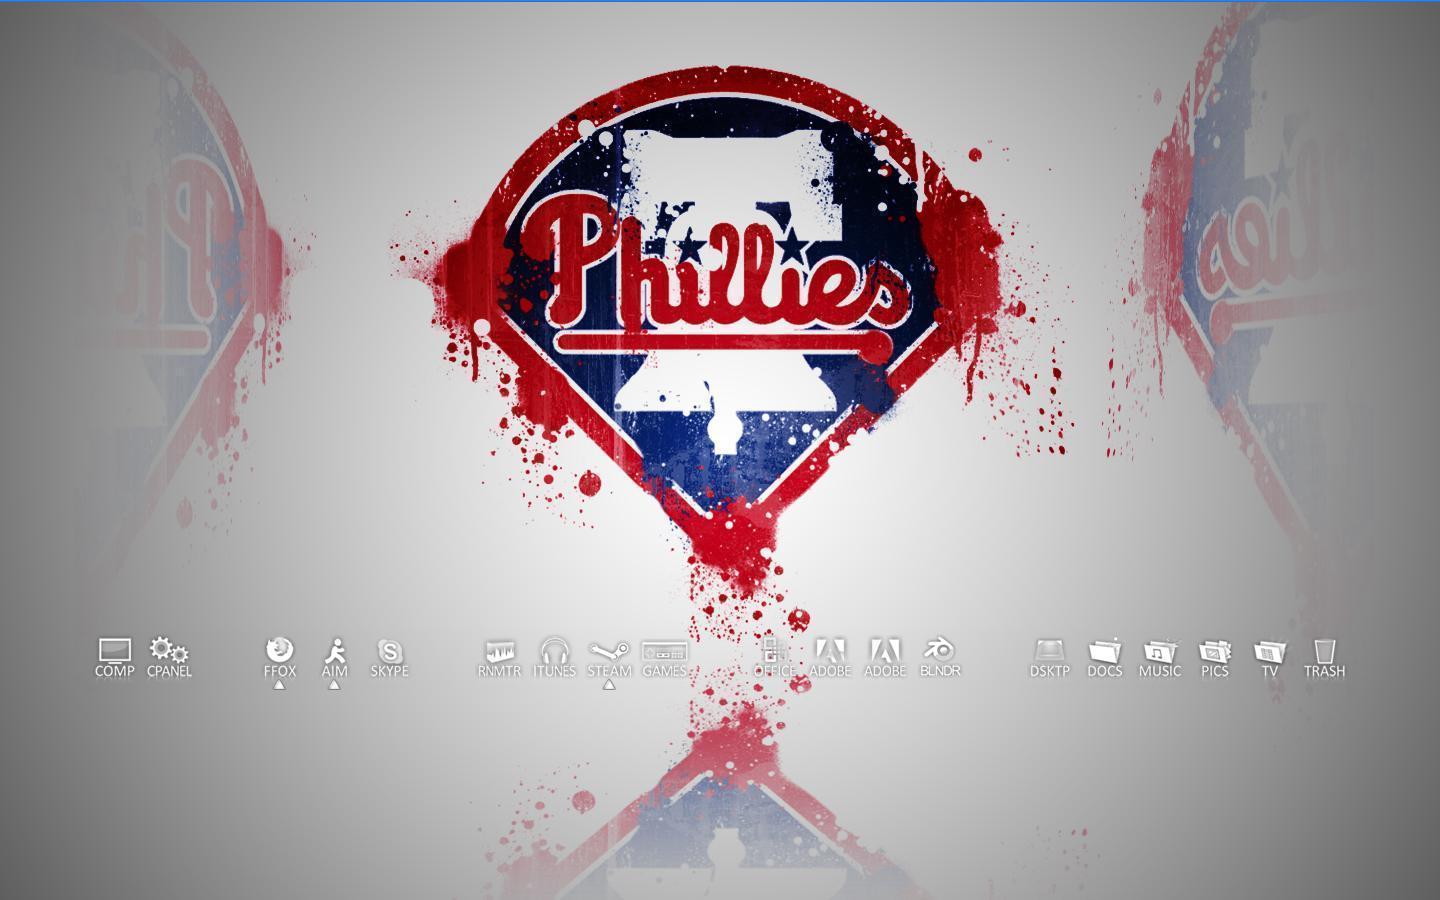 Phillies Wallpapers 2017 - Wallpaper Cave